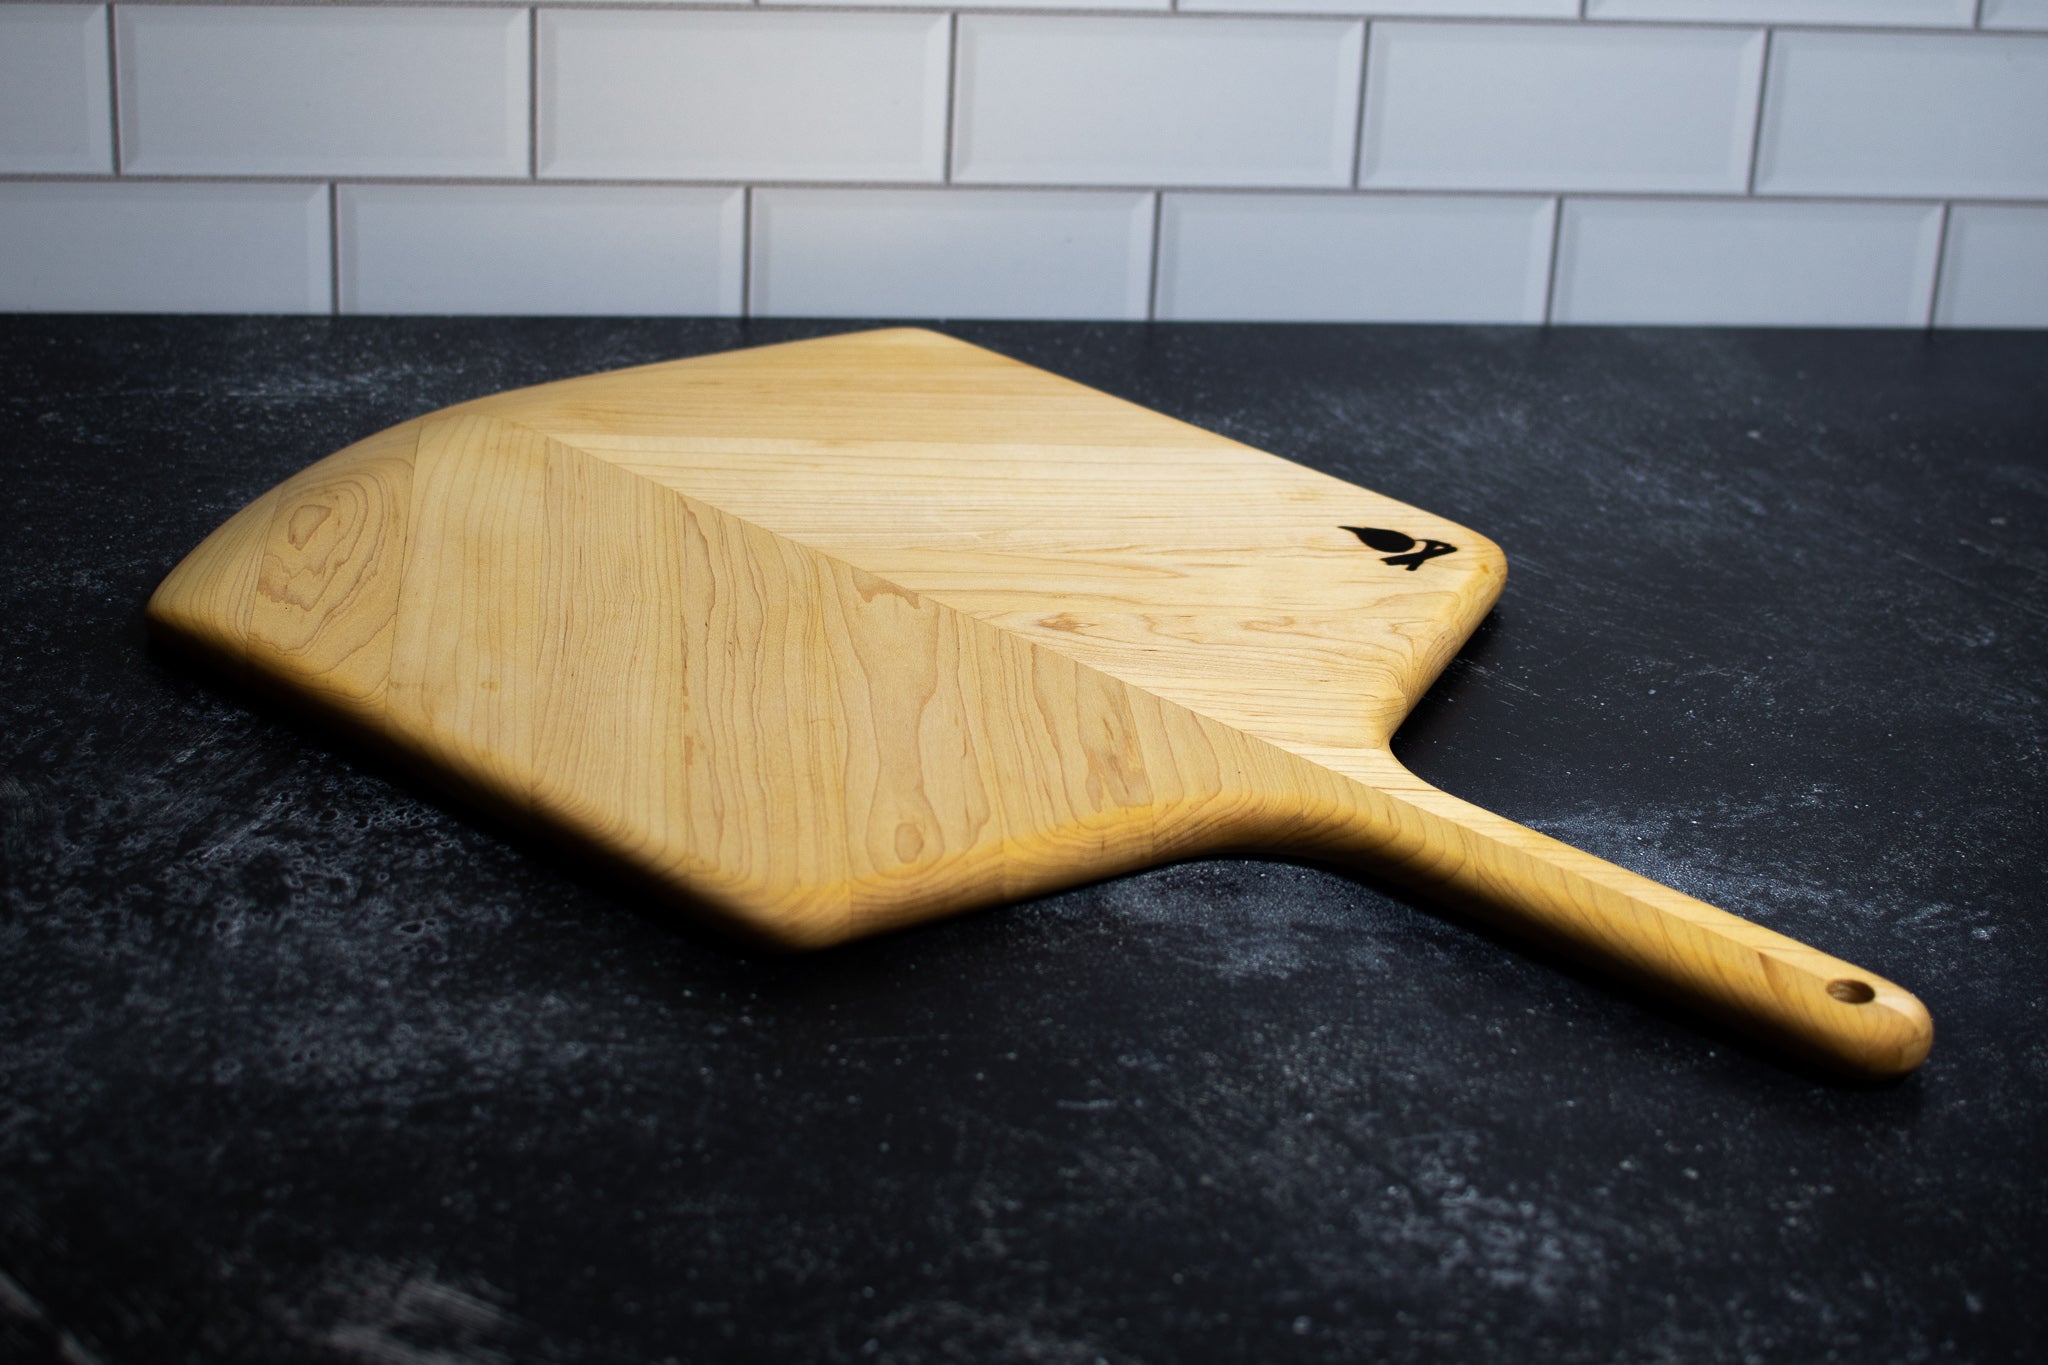 Our pizza peels are made of the highest quality seasoned hardwood. –  Soapstone Products